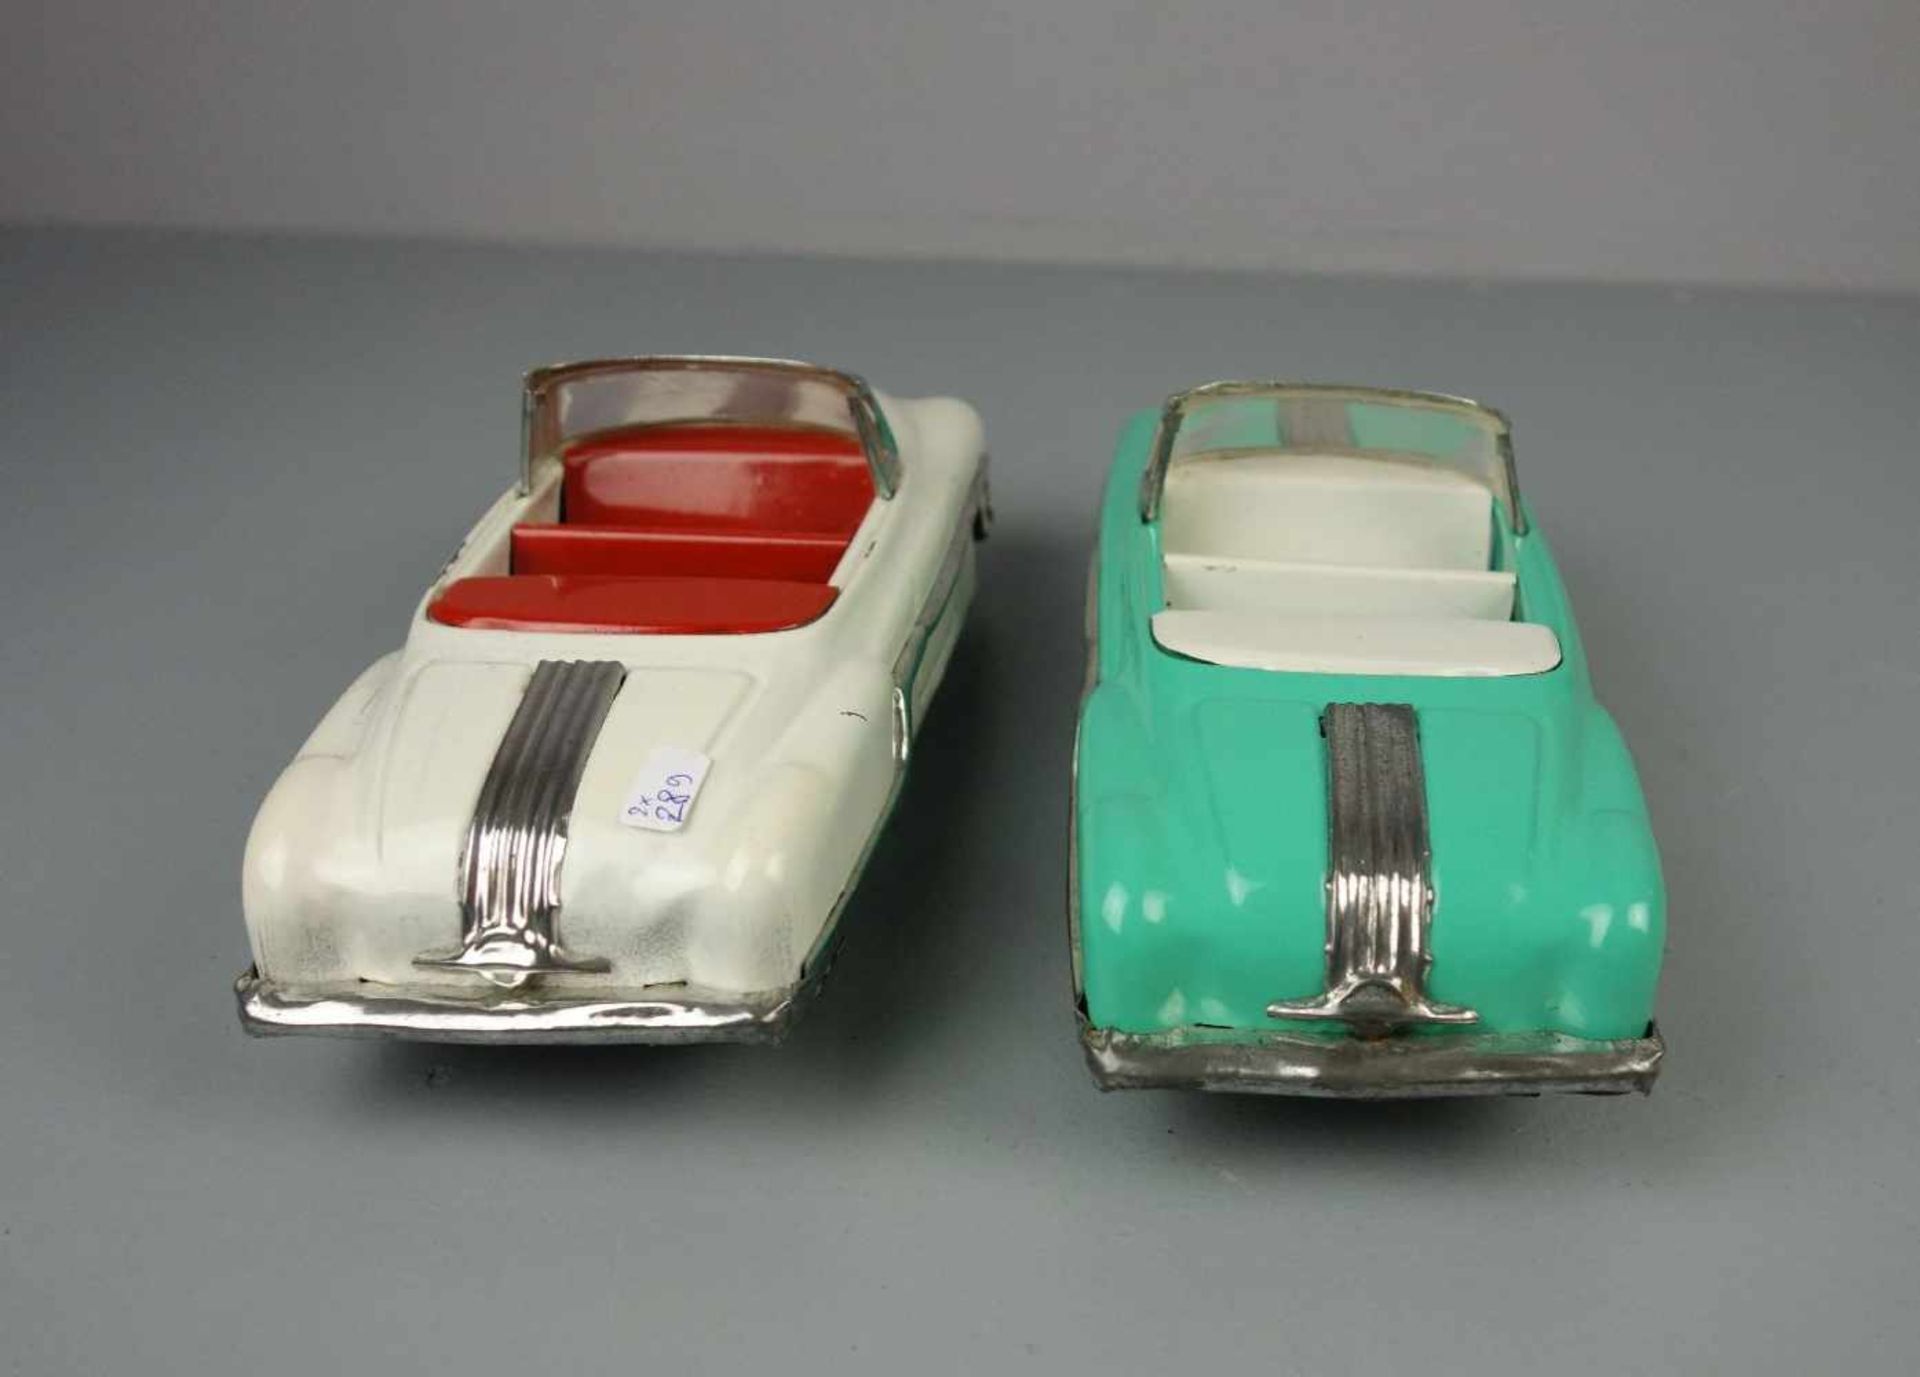 BLECHSPIELZEUG / FAHRZEUGE: 2 AUTOS - MINISTER - OPEN DELUXE / two tin toy cars, Mitte 20. Jh., - Image 5 of 7